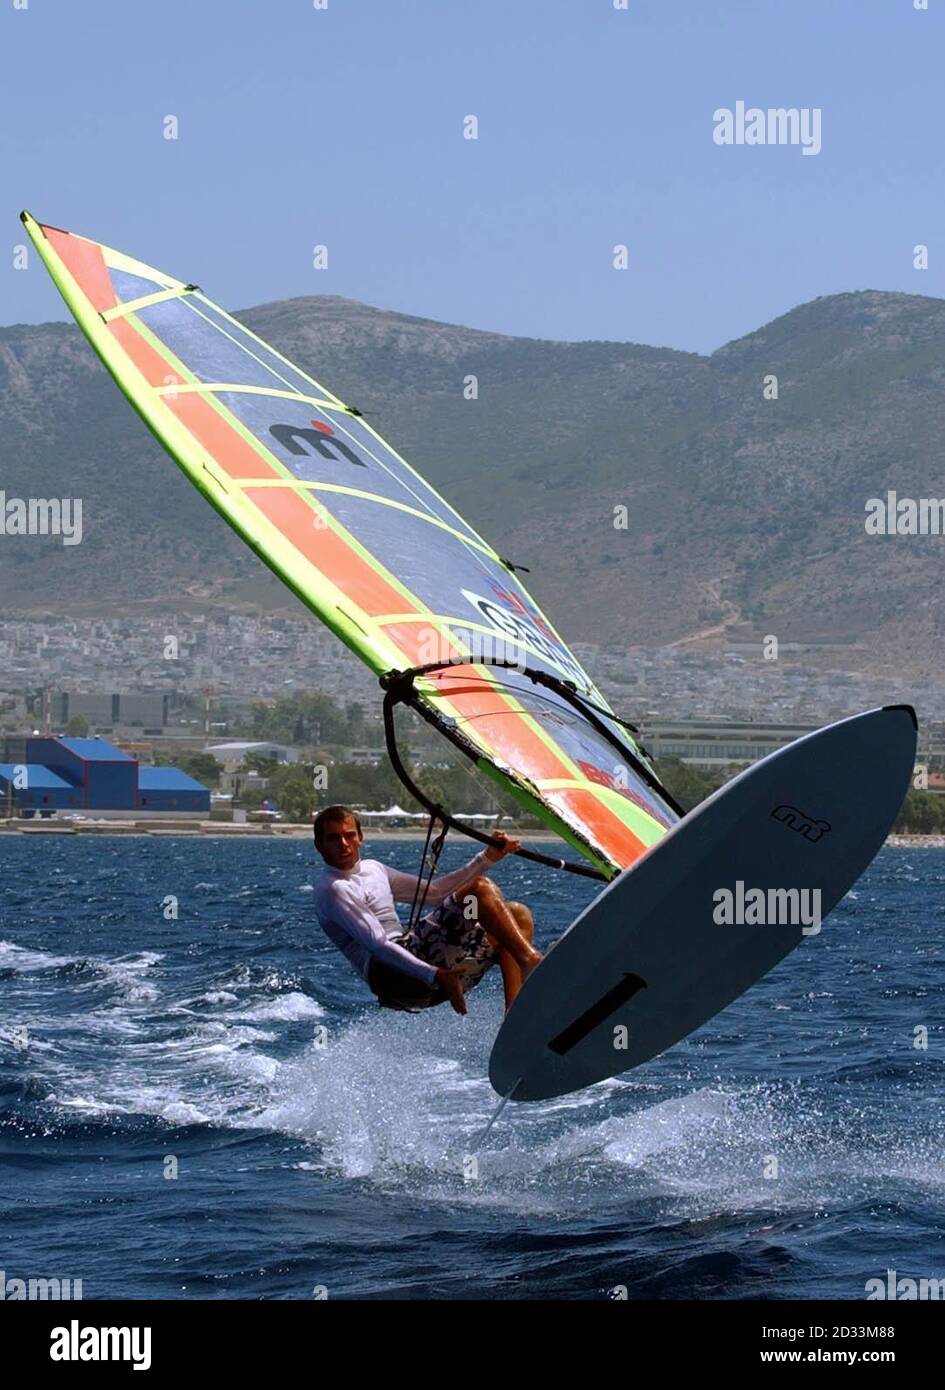 Norwich born Nick Dempsey on the water during the Royal Yachting Association's olympic team preview day at their base in Athens, Greece. Nick will compete in the Mistral class at the Athens 2004 olympics as part of the Great Britain sailing team.  Stock Photo